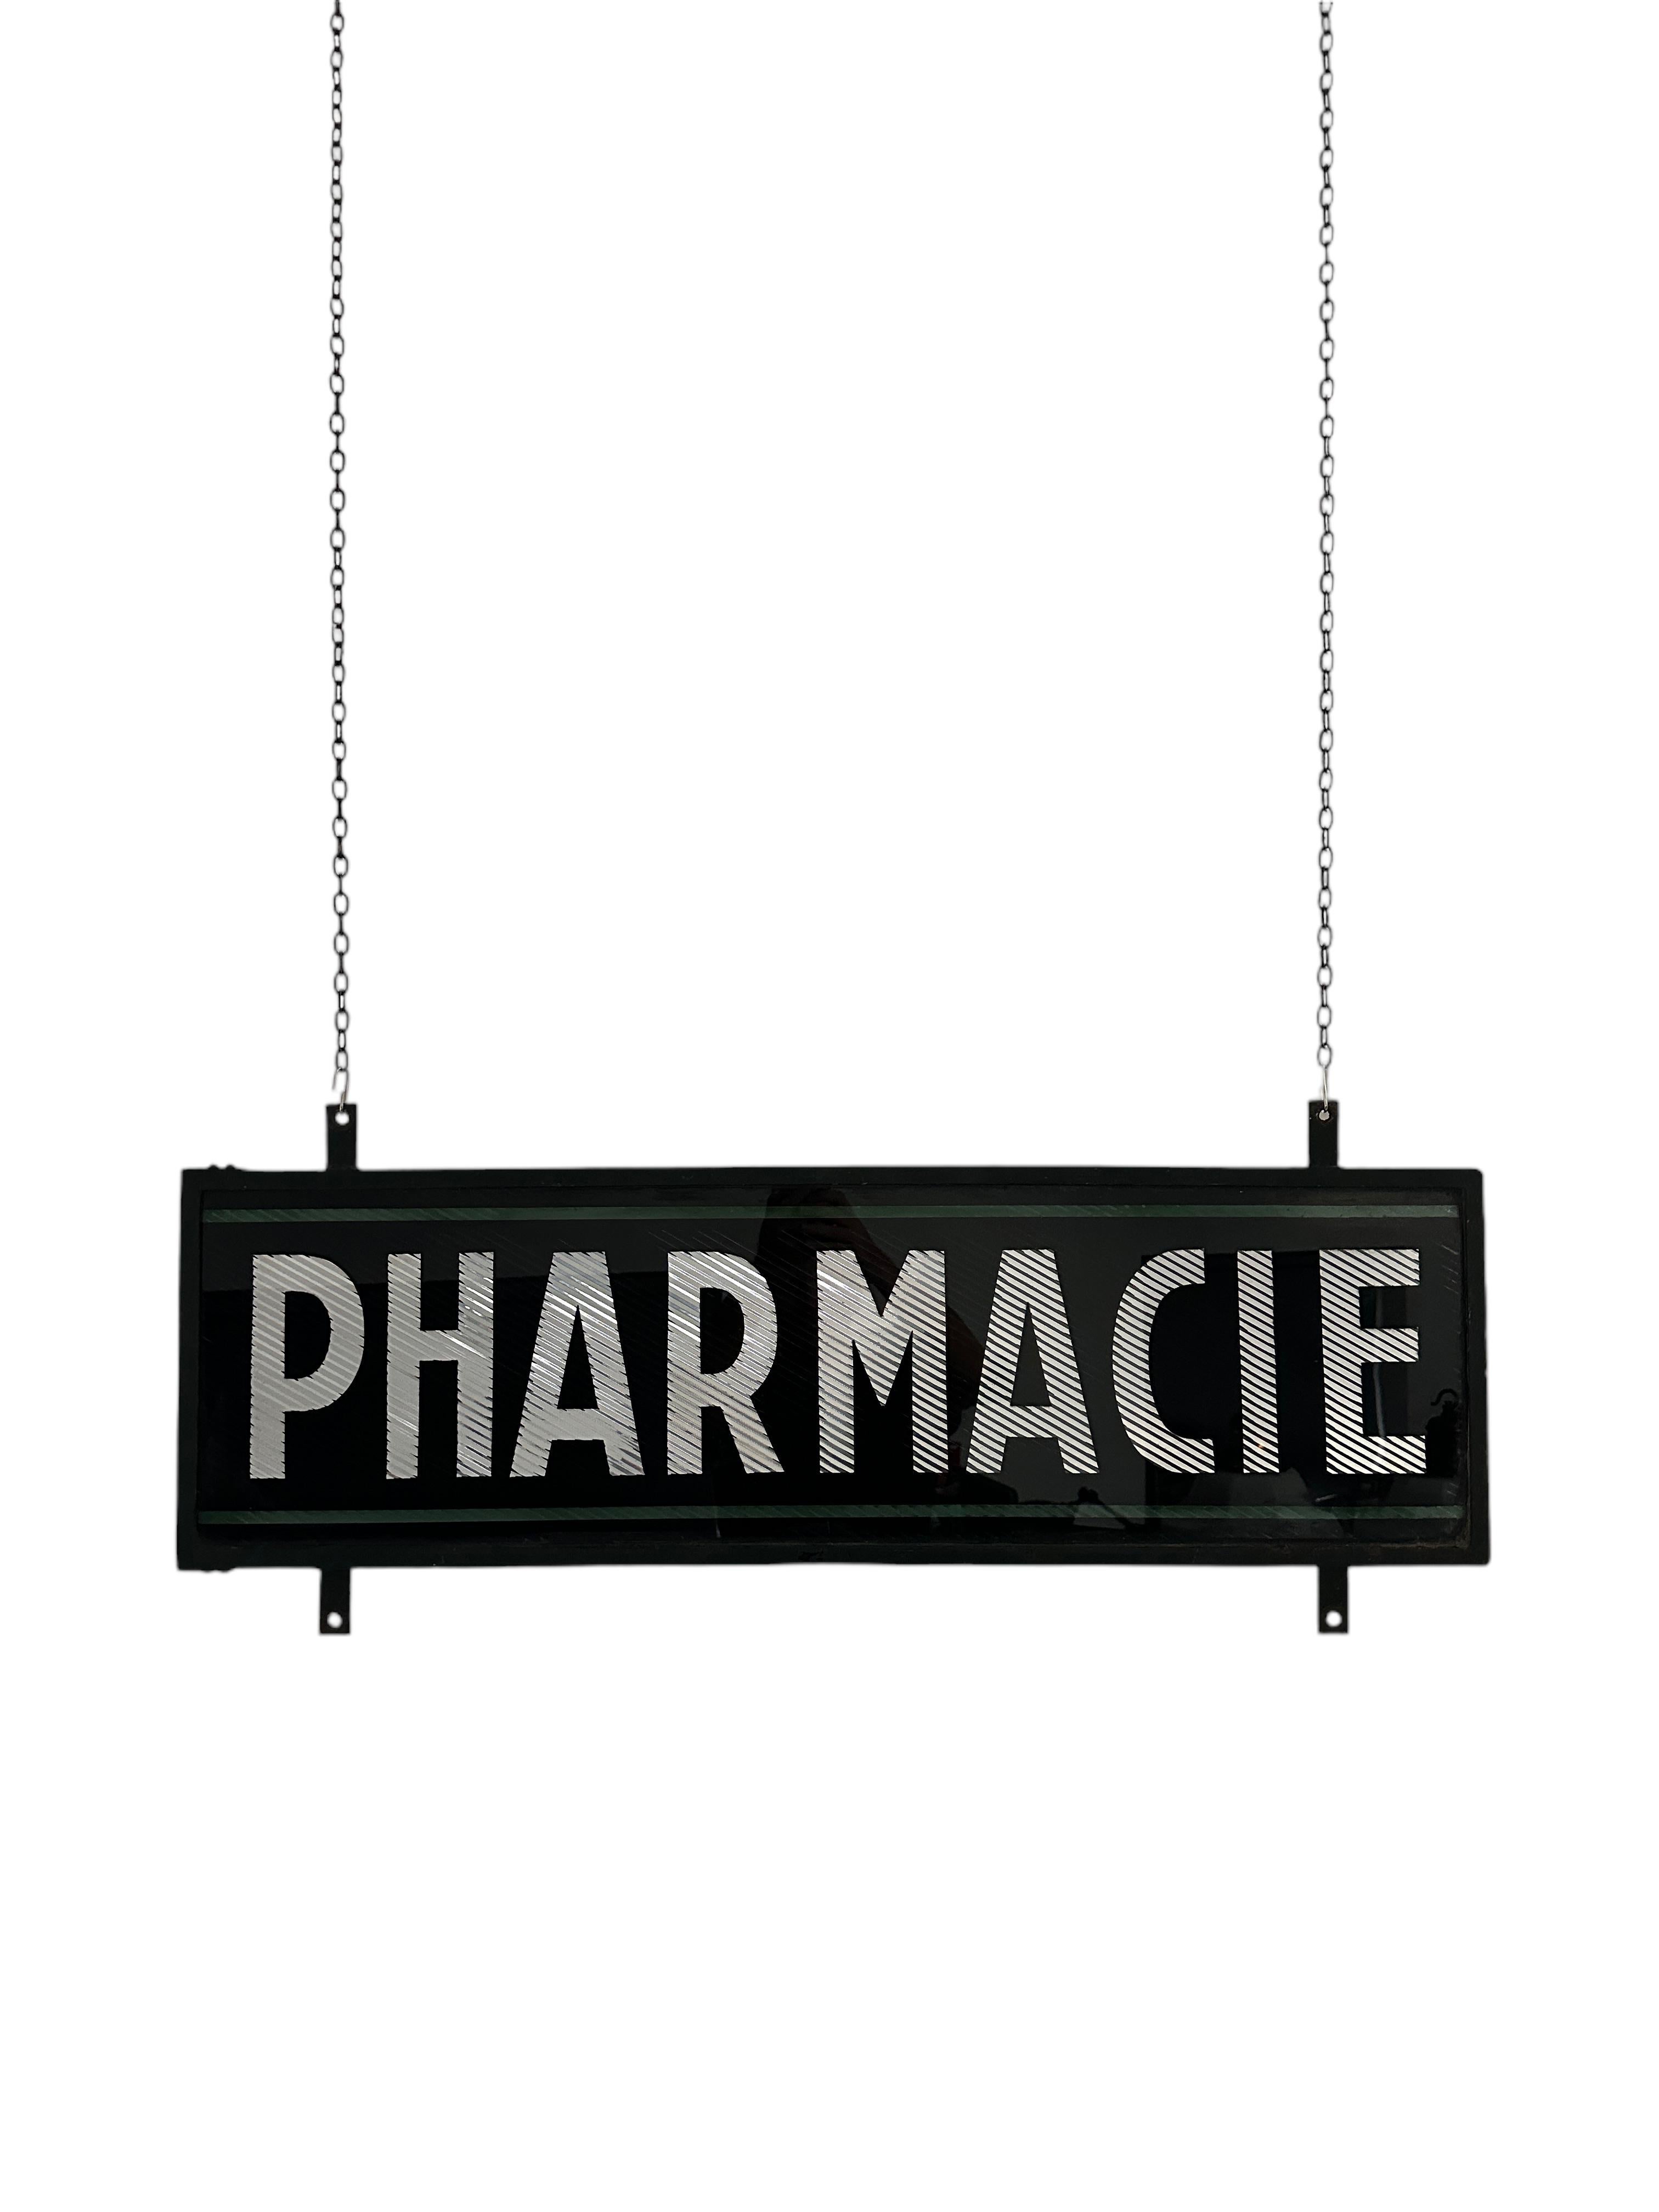 french pharmacy sign